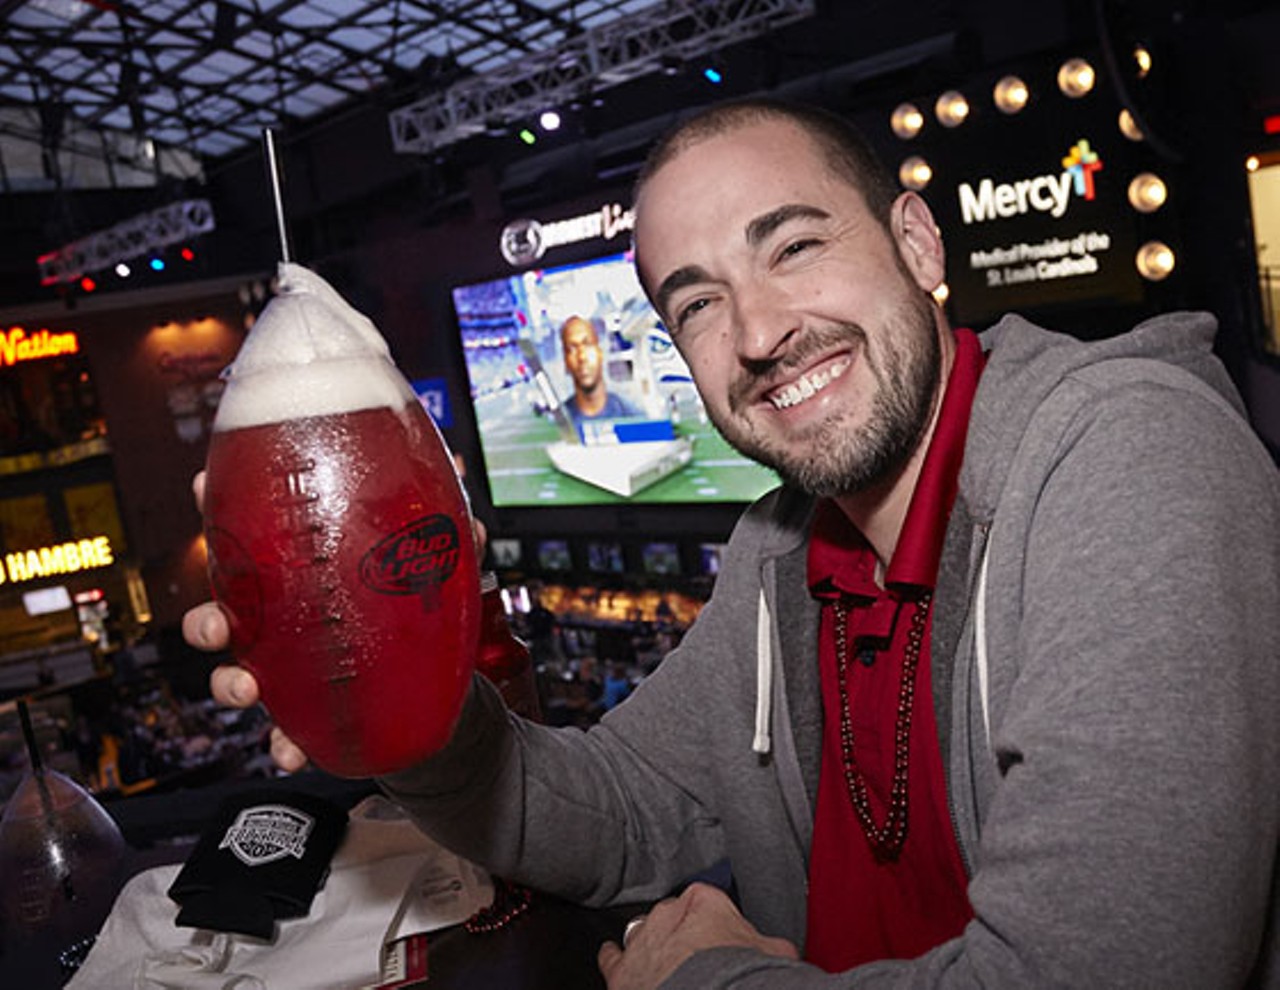 Kyle Sutherland shows RFT how you drink for the Superbowl. In a football, duh.